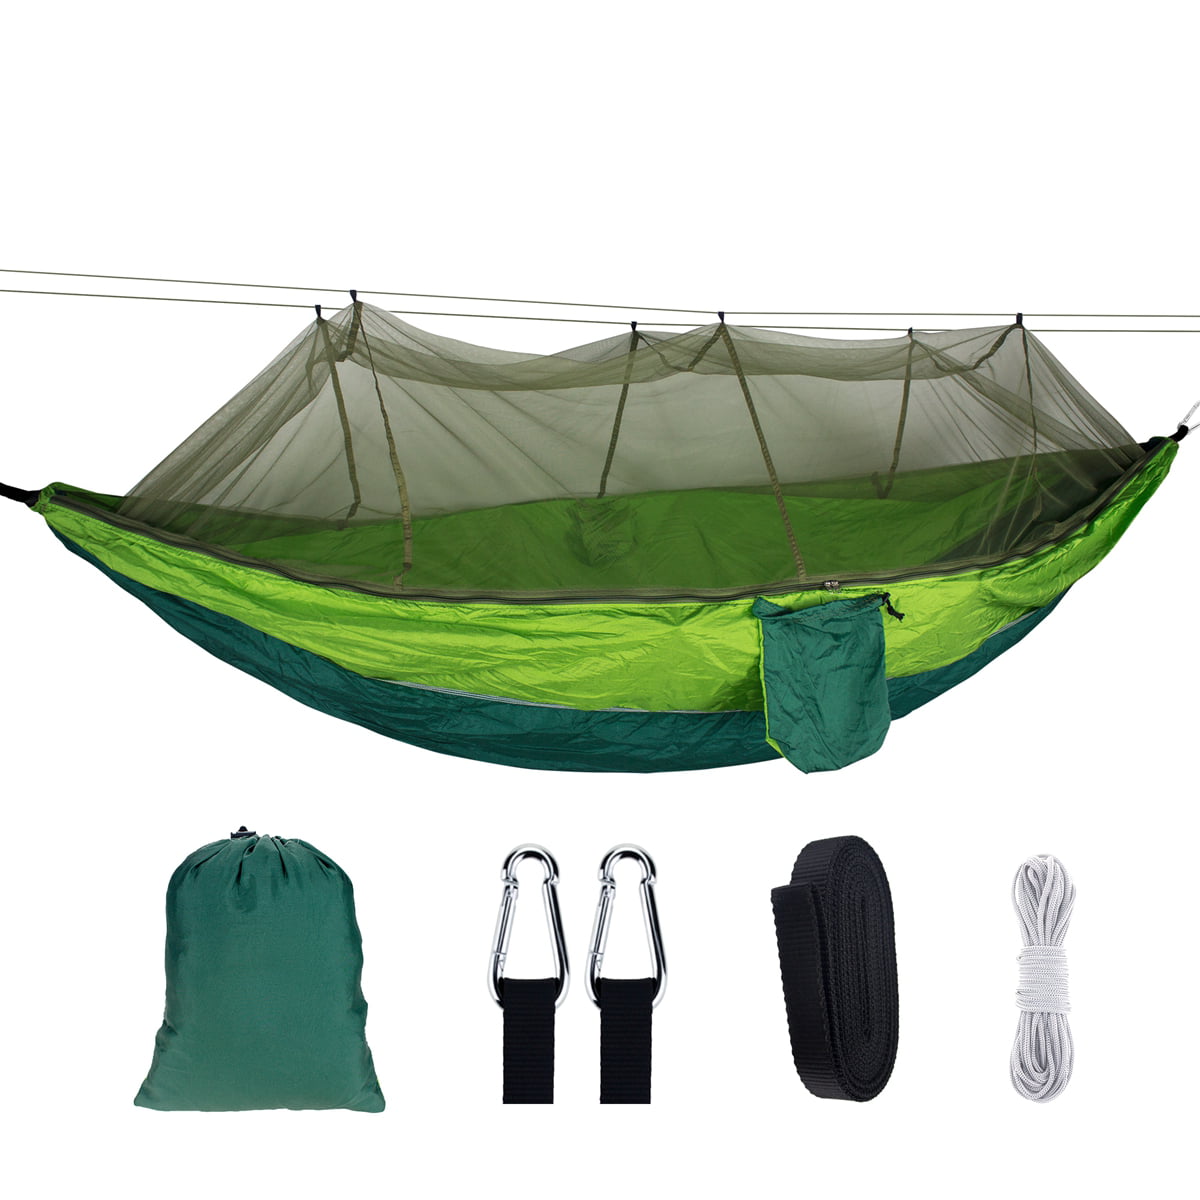 Portable Double Travel Outdoor Camping Mosquito Net Hanging Hammock Bed W/ Swing 